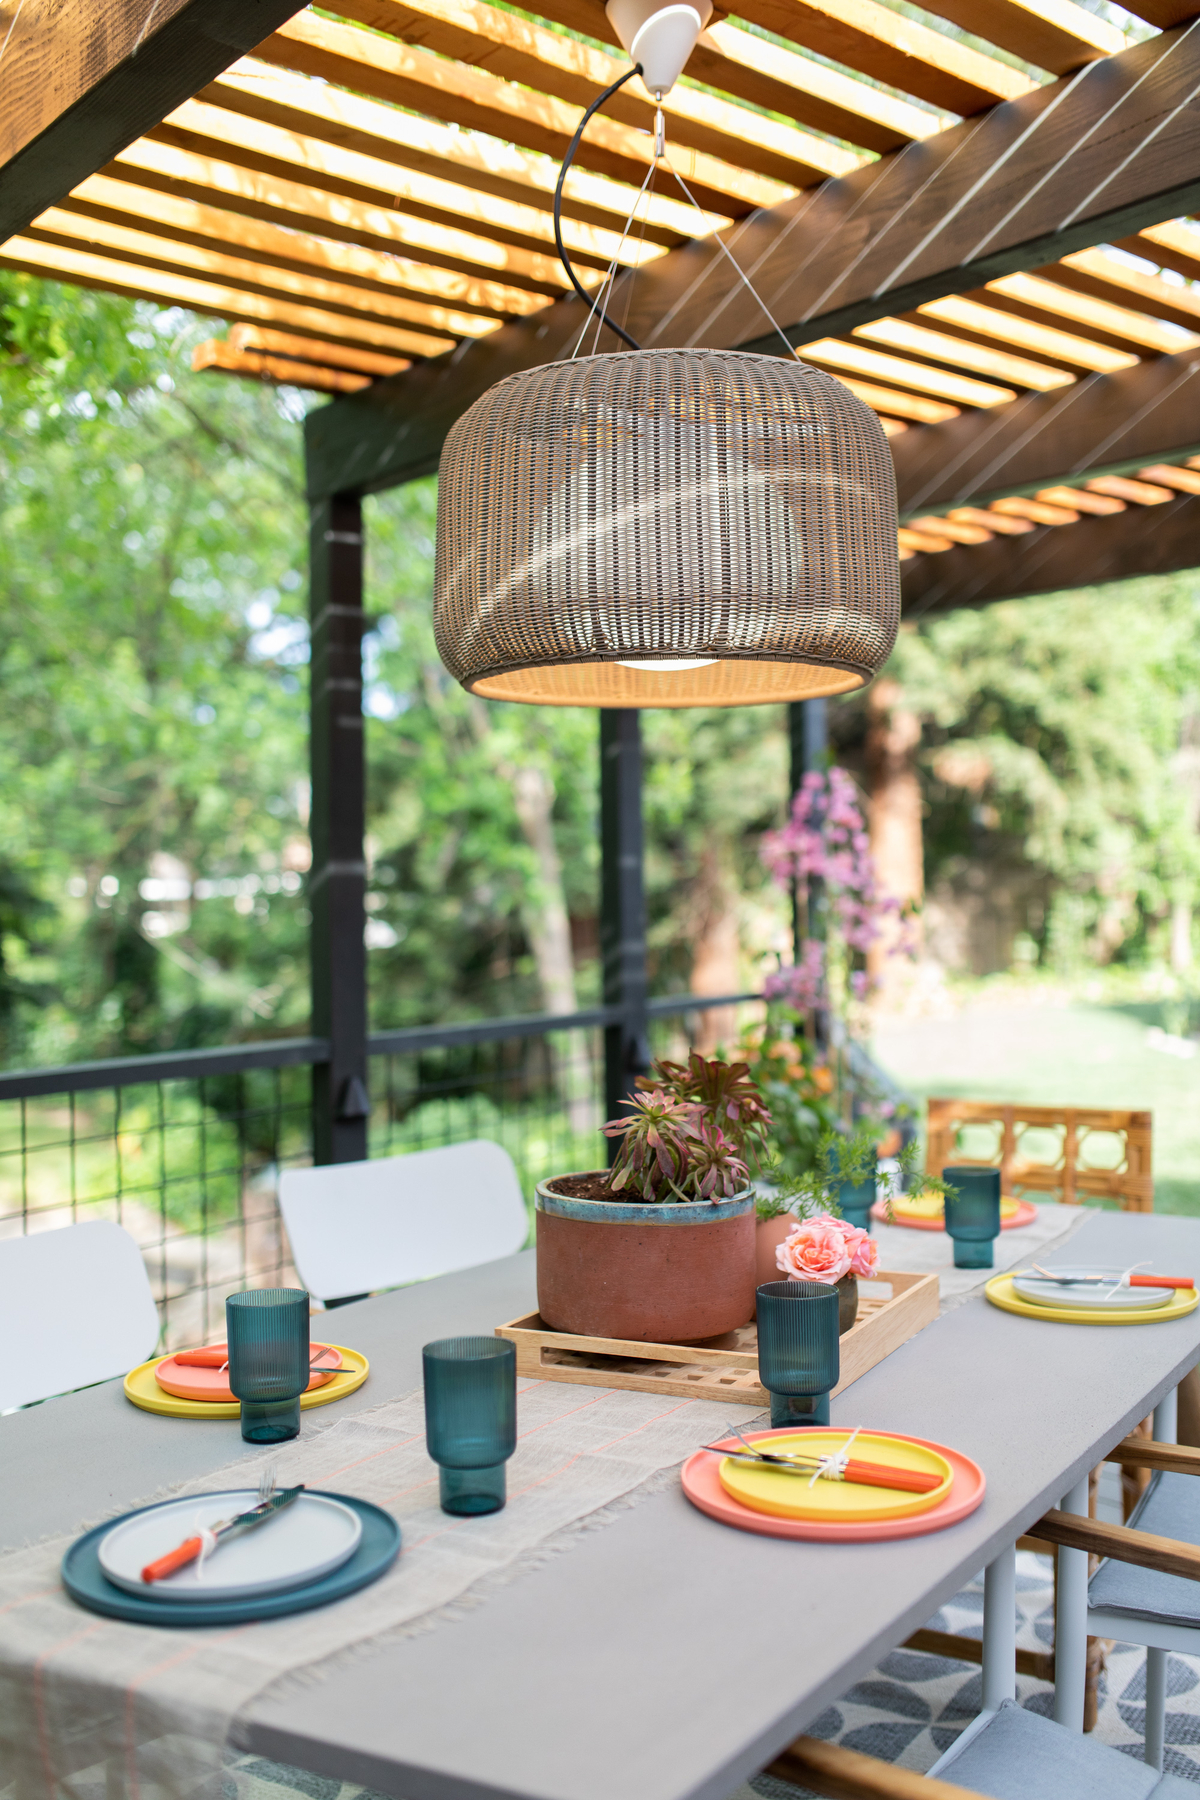 Modern pendant over outdoor dining table.